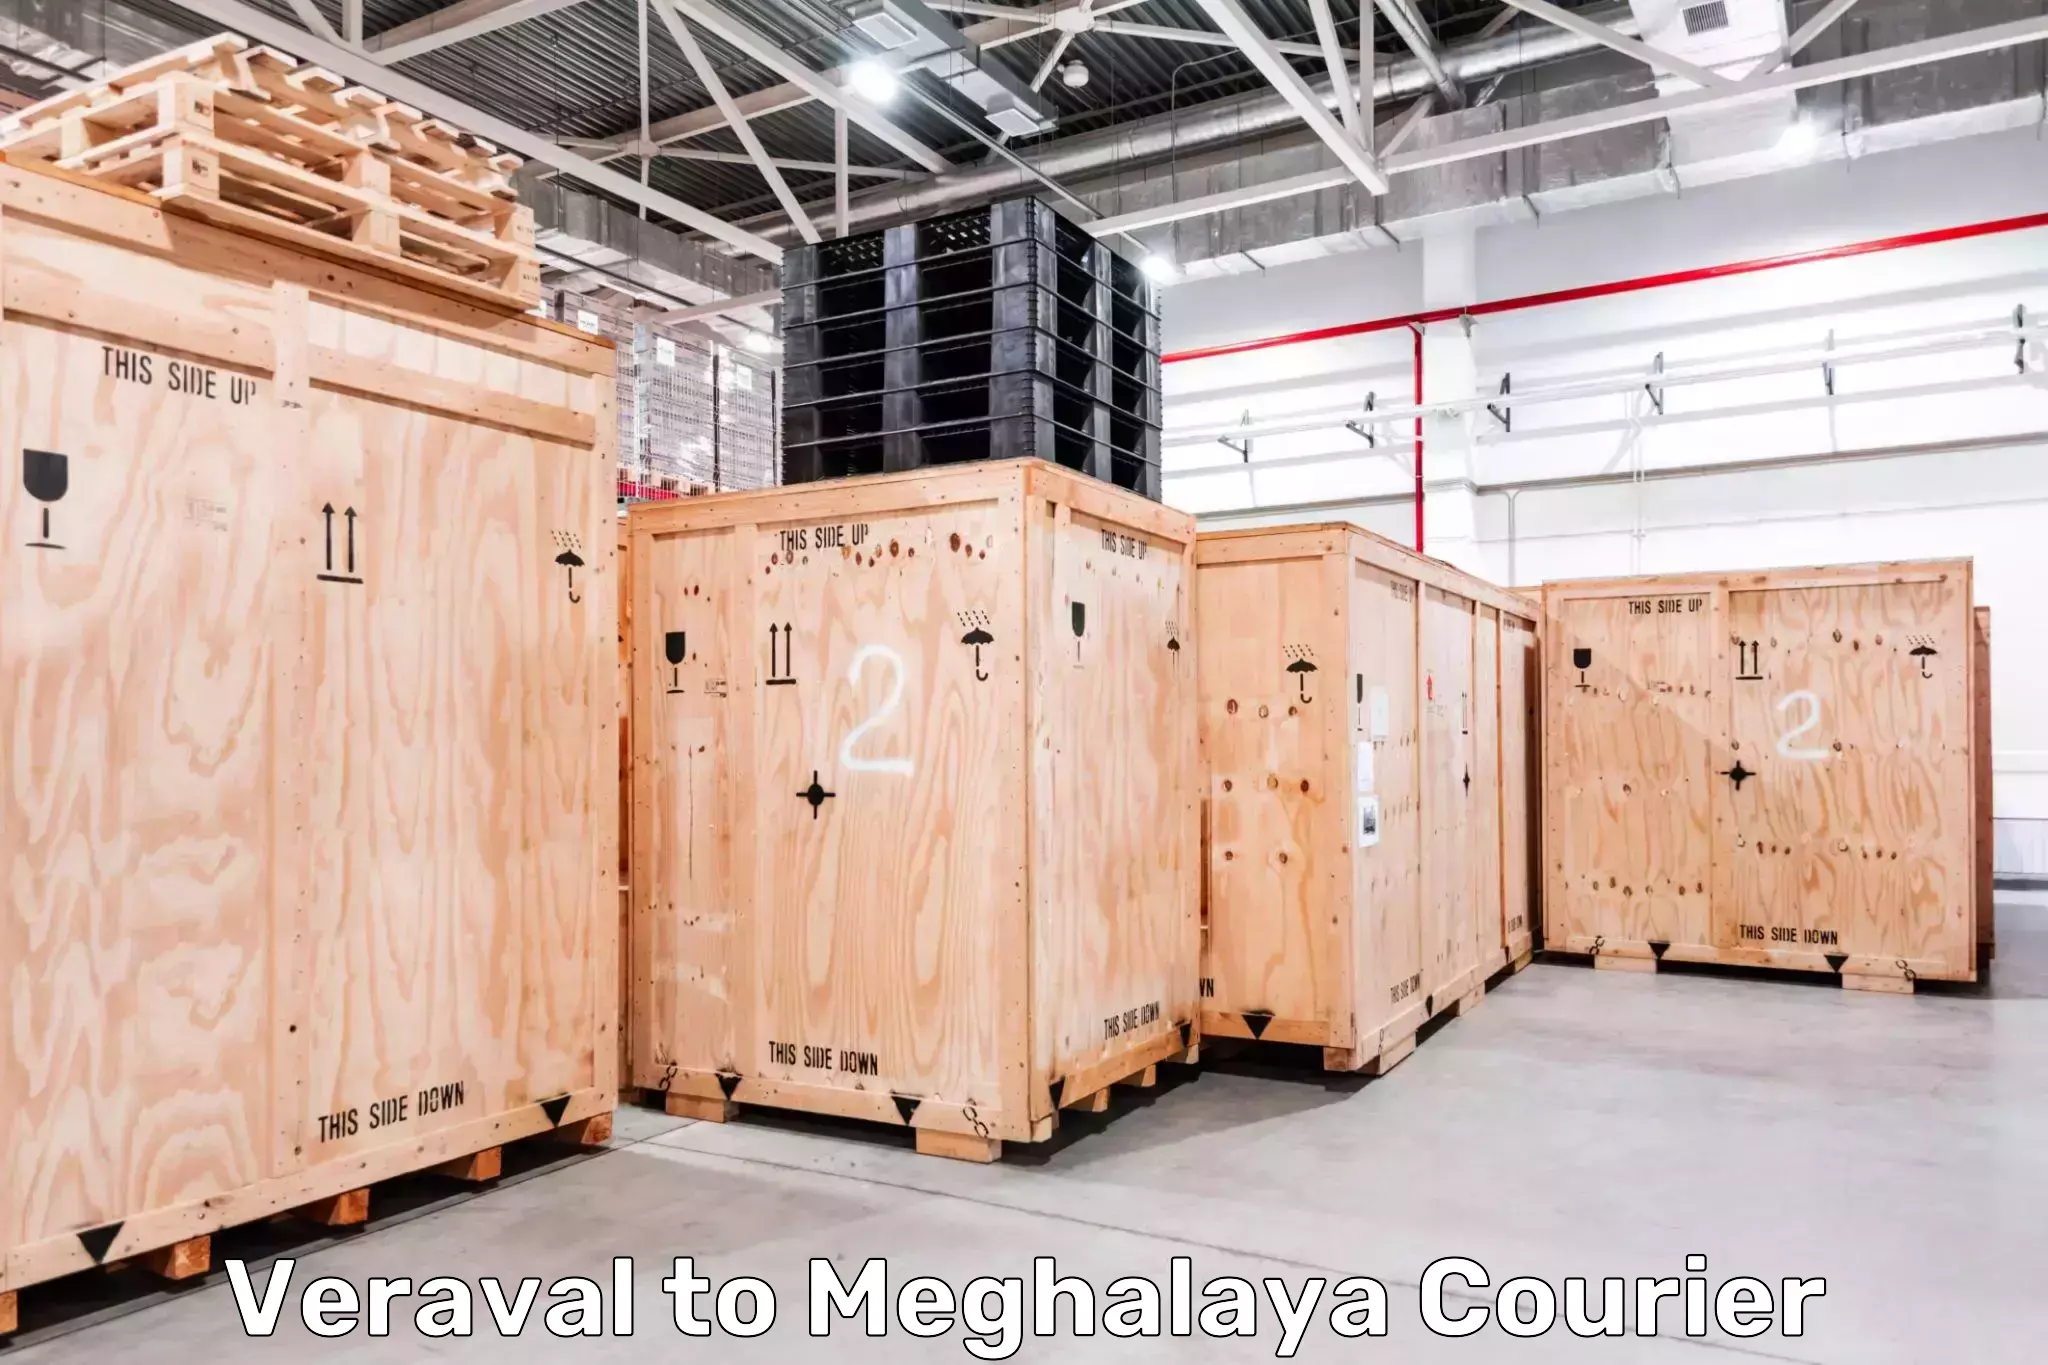 Global courier networks Veraval to Jowai